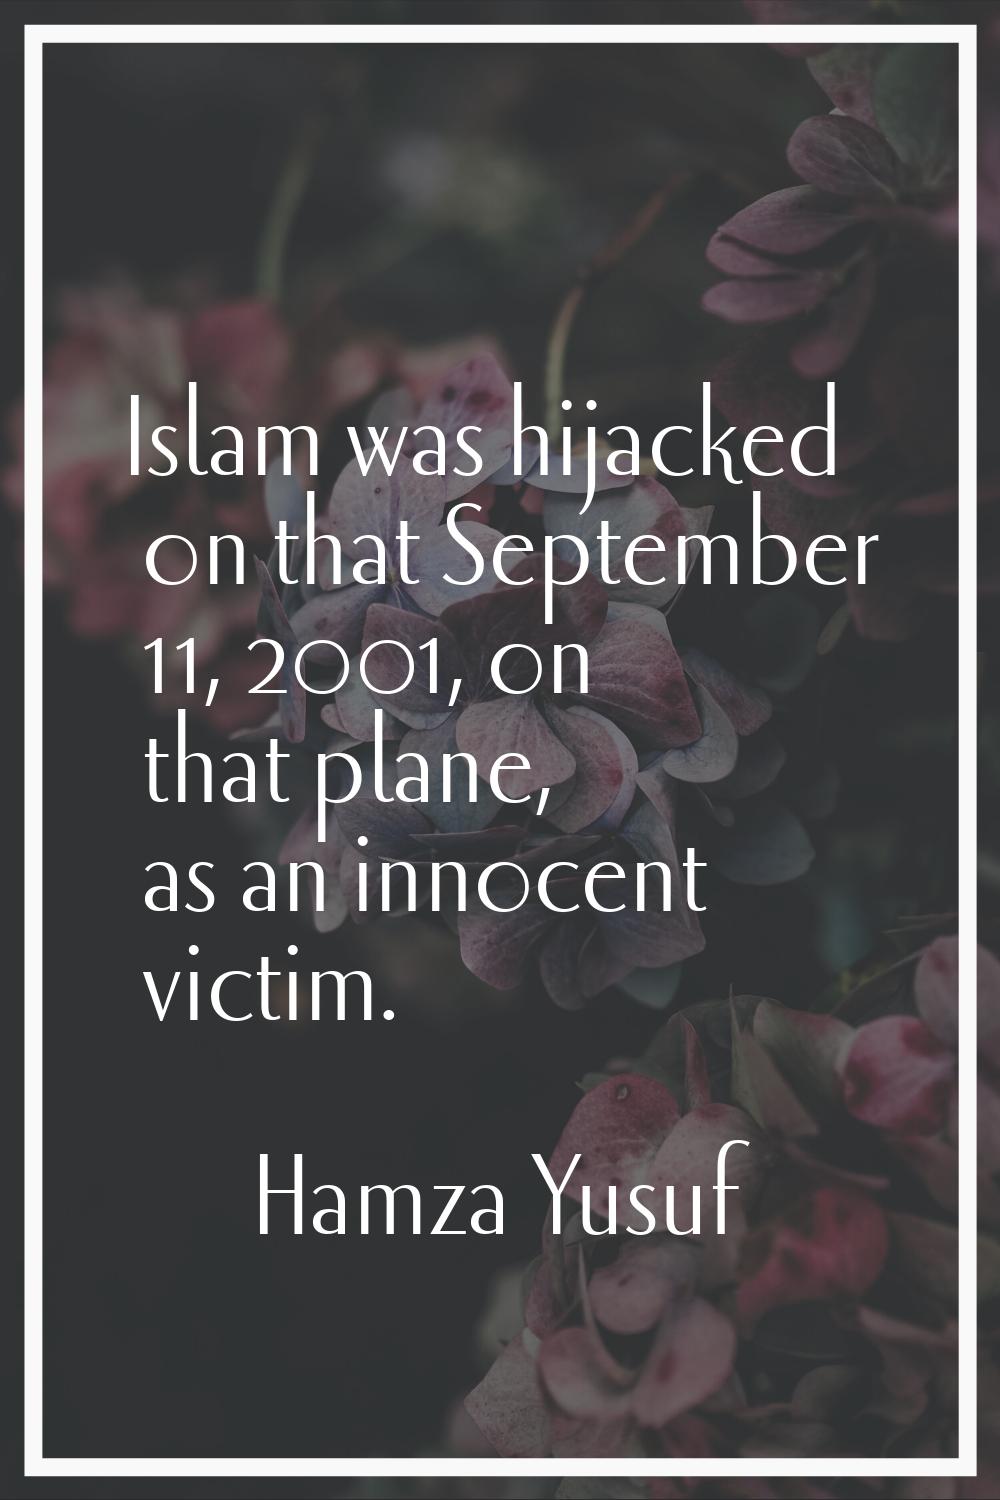 Islam was hijacked on that September 11, 2001, on that plane, as an innocent victim.